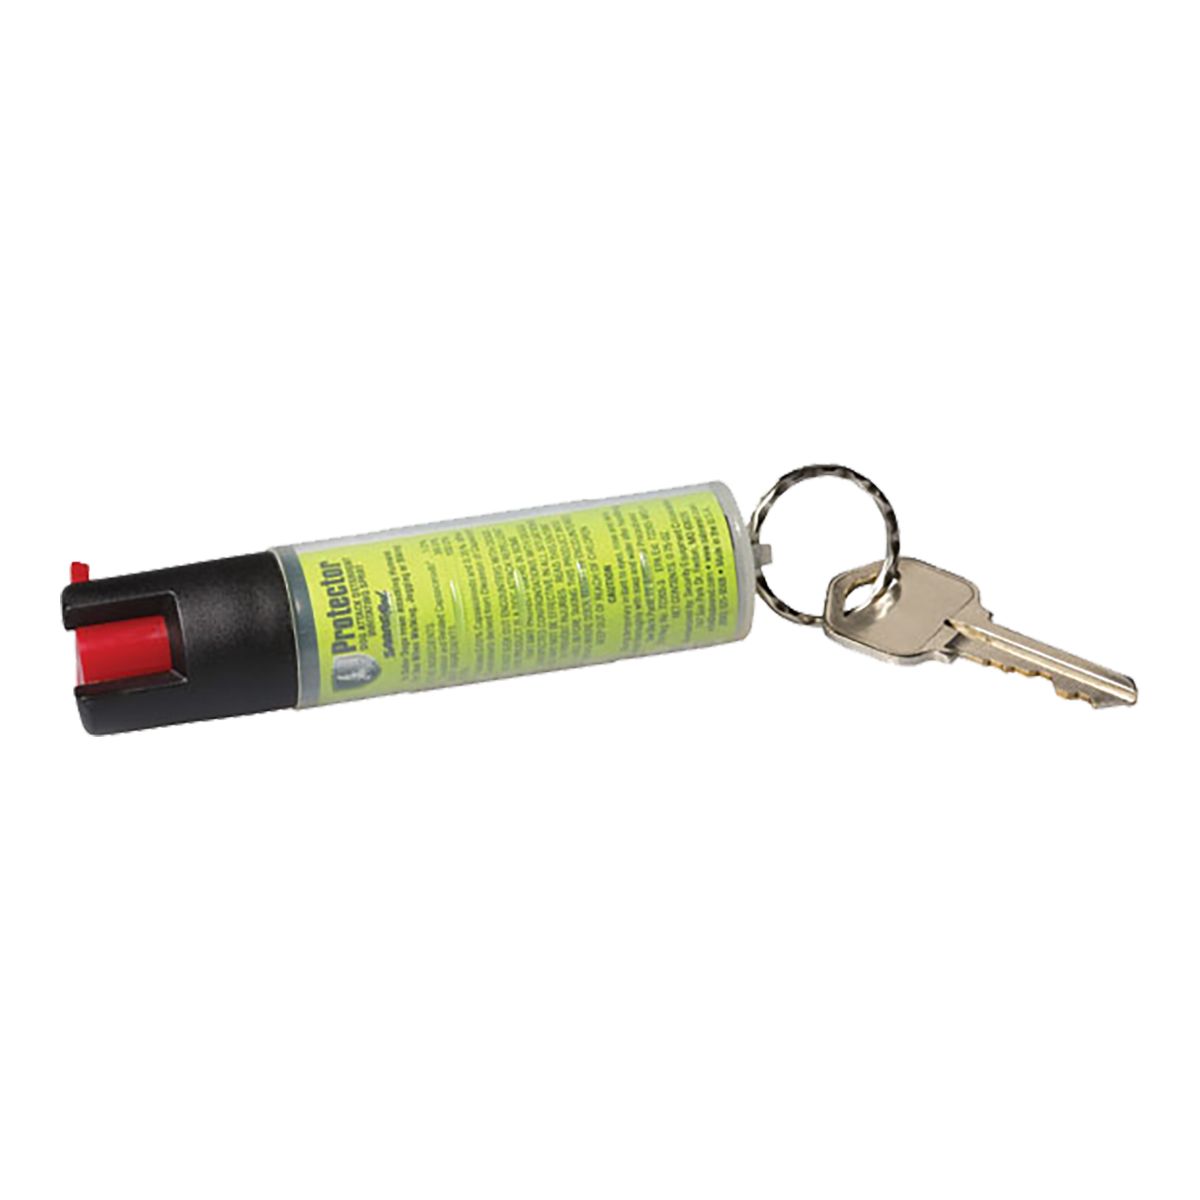 Image of Sabre Dog Spray 22g with Clear Case & Key Ring